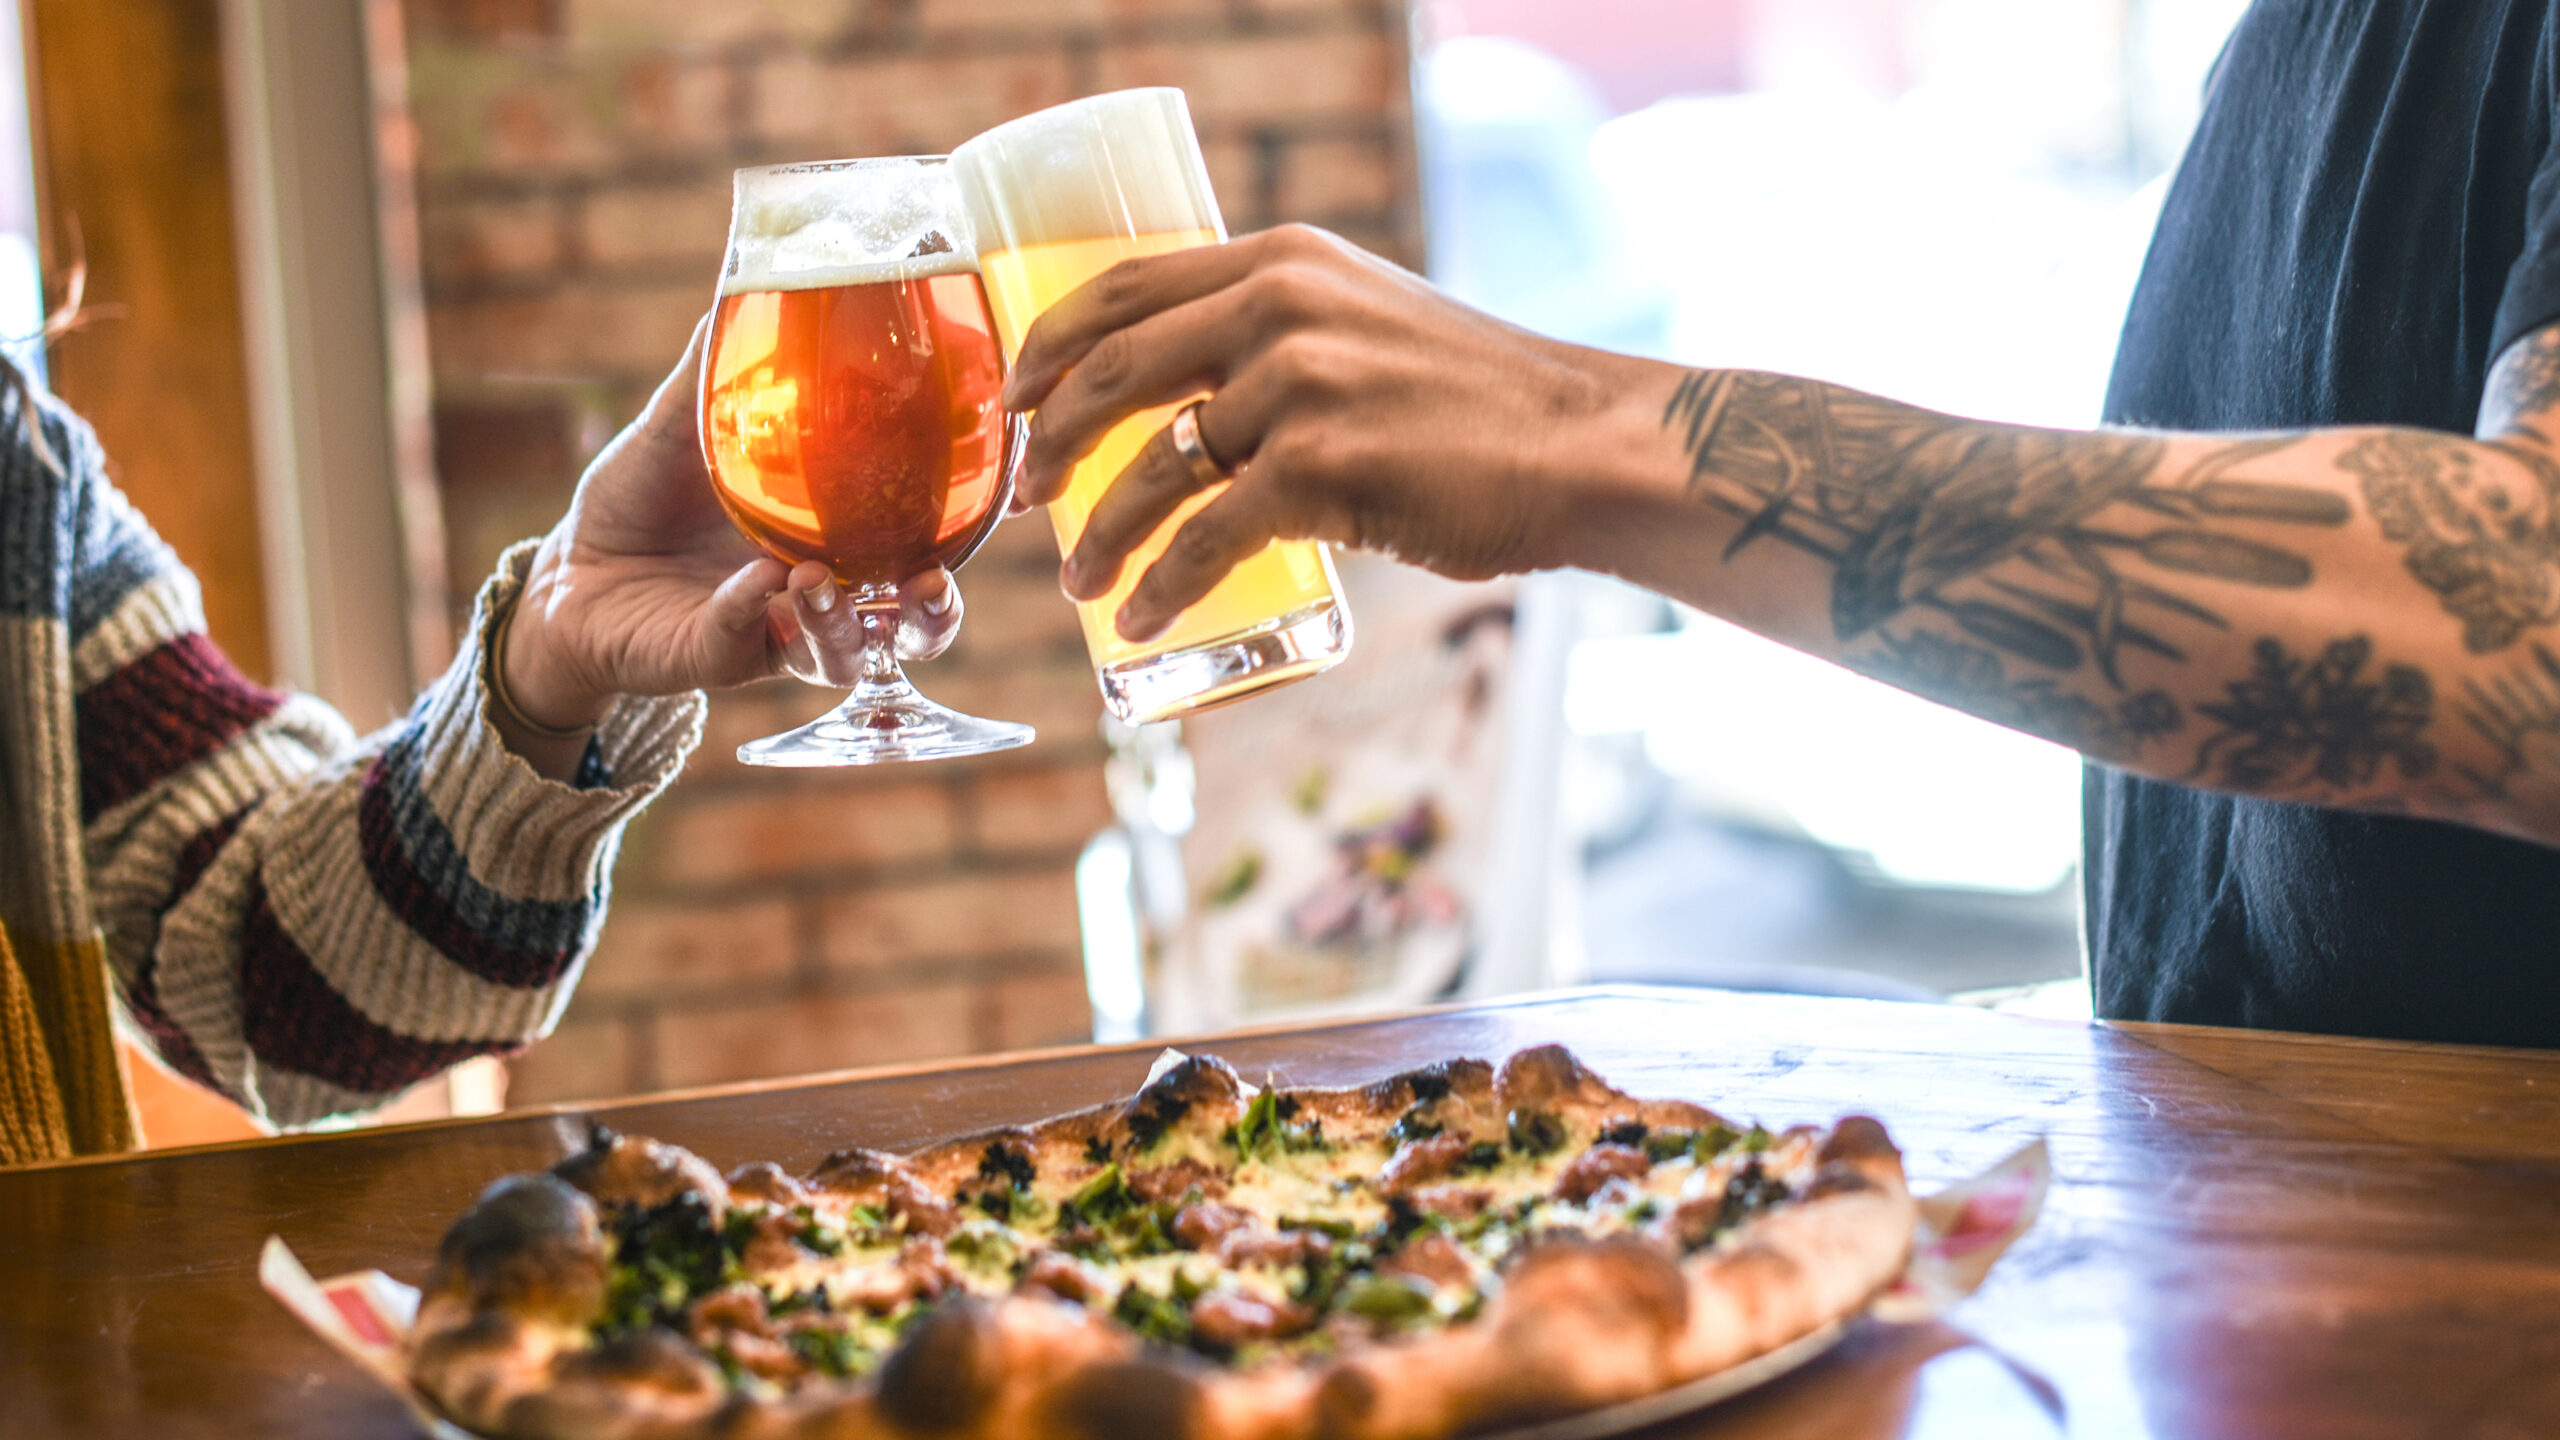 GRAB A PIZZA THE ACTION WITH AMERICAN CRAFT BEER!